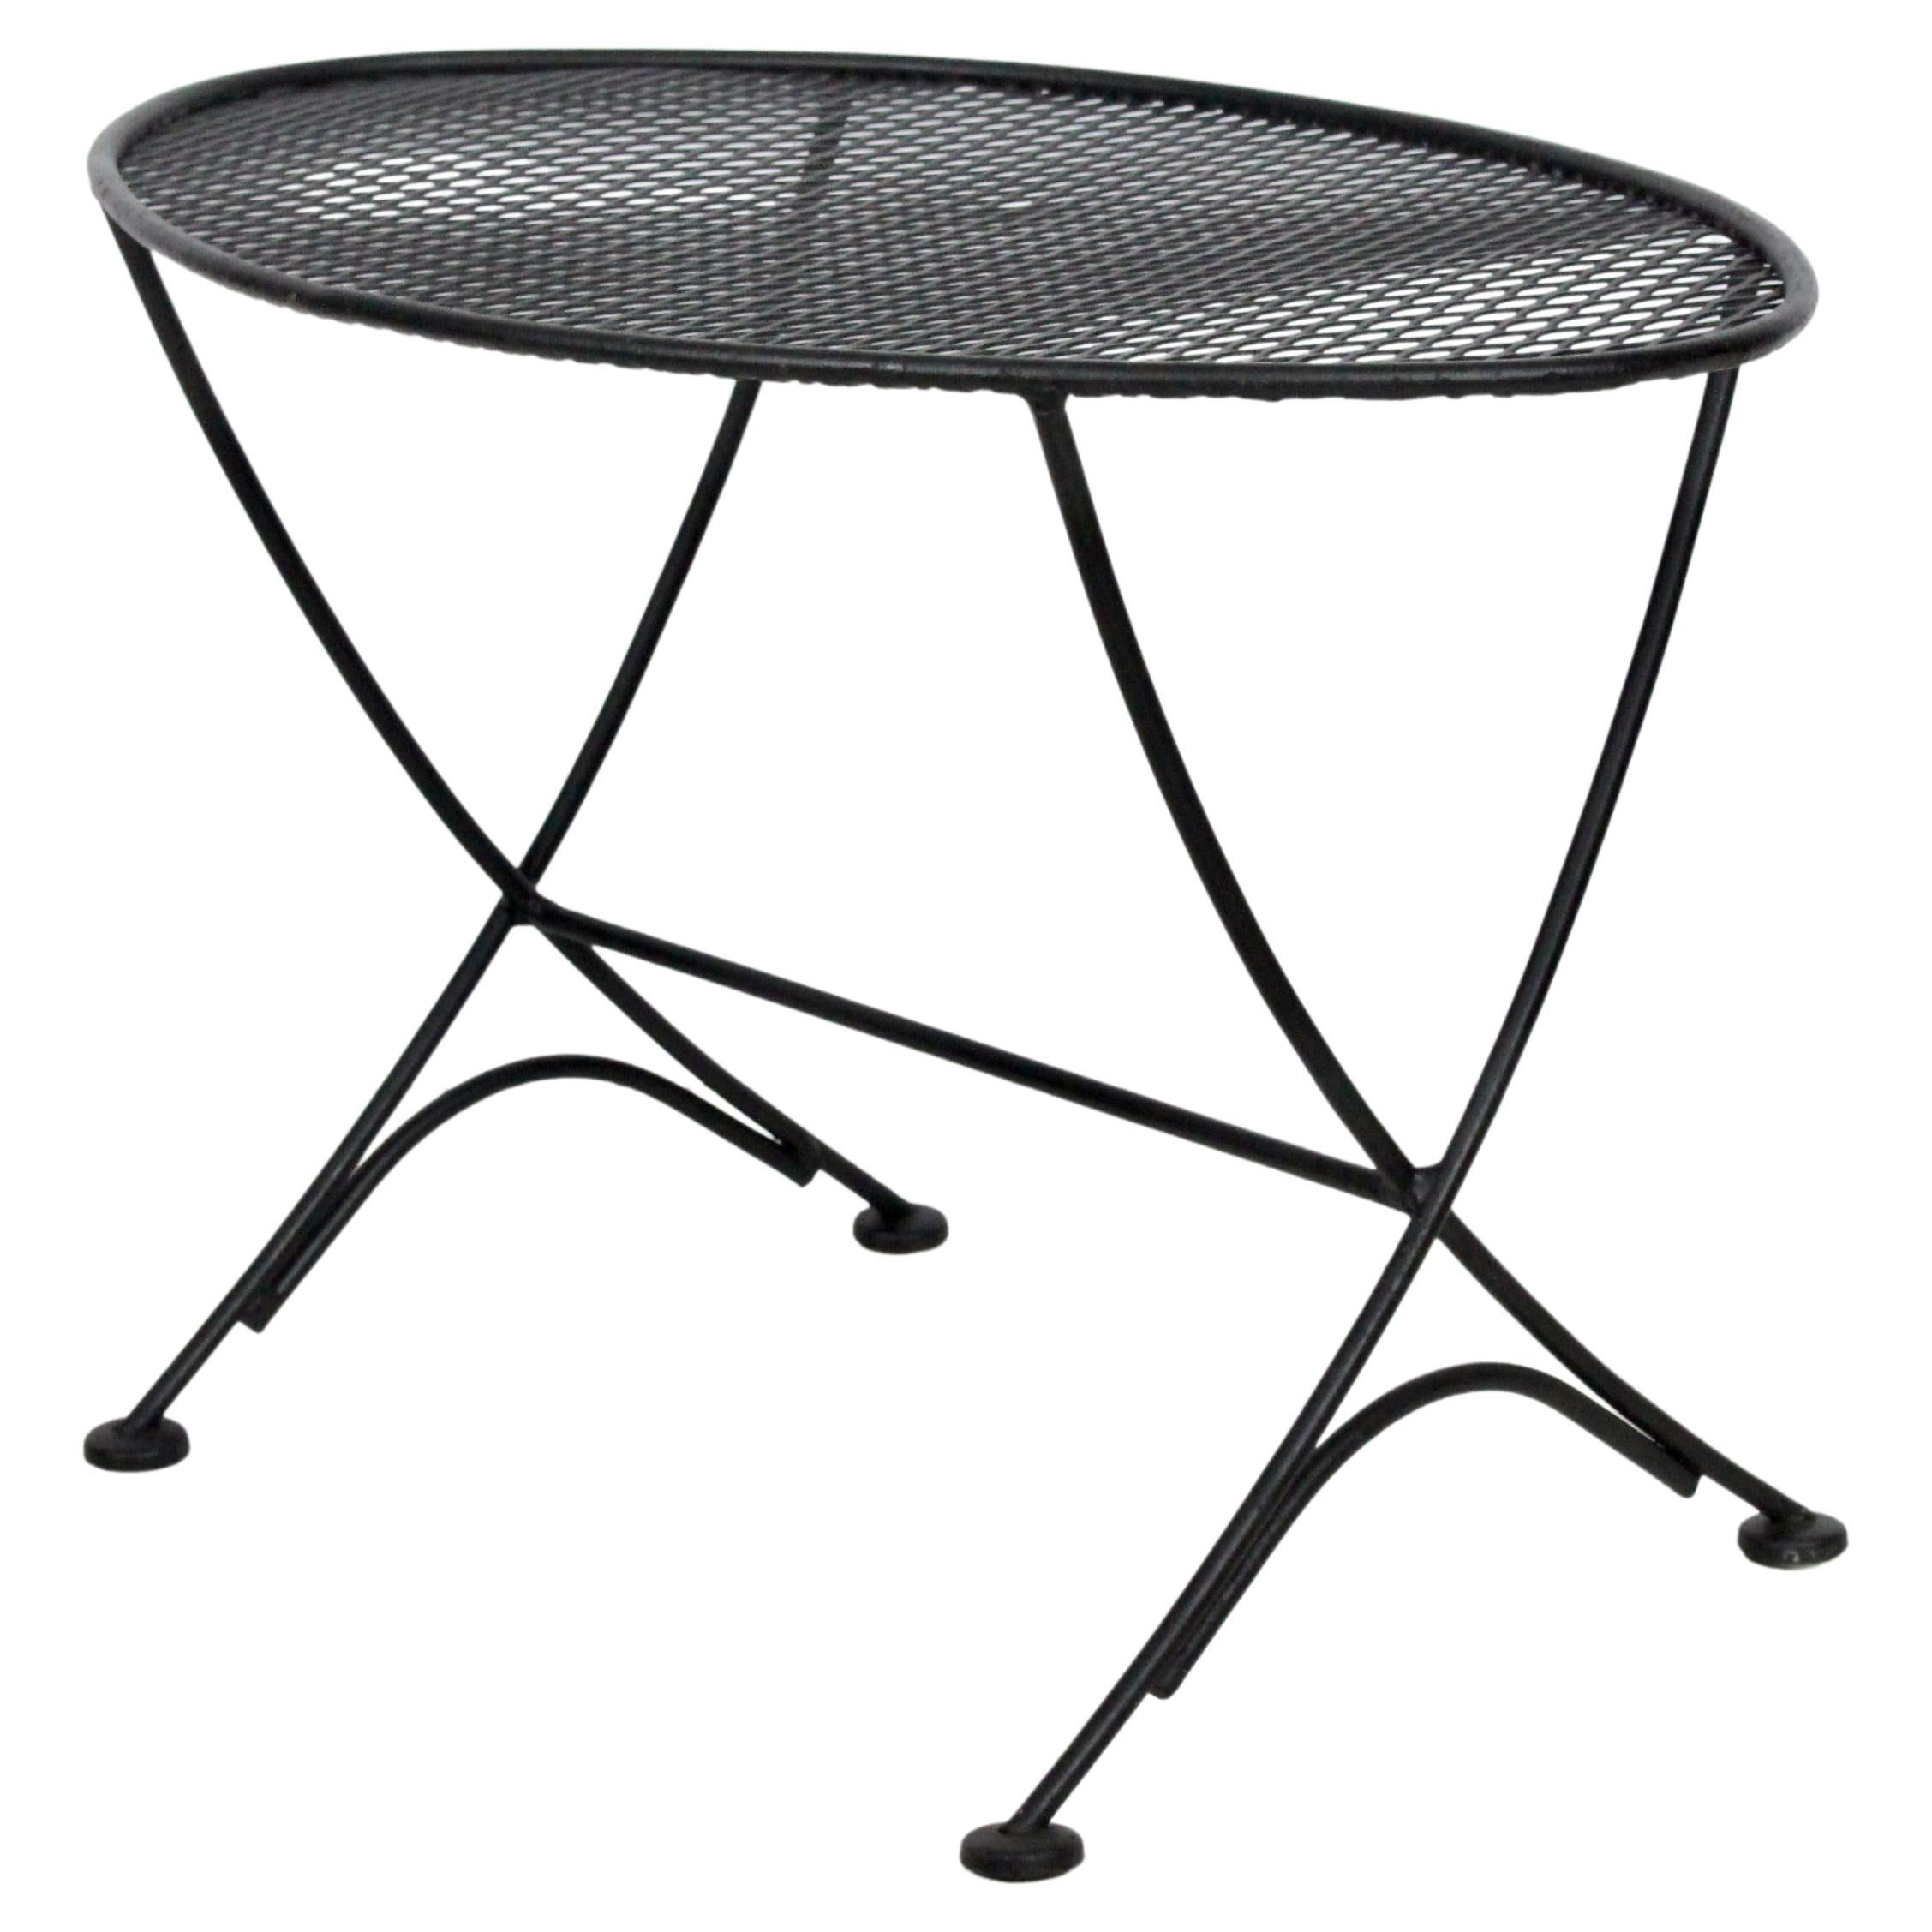 Original Maurizio Tempestini for Salterini black wrought iron and metal mesh oval occasional table, small coffee table, end table, side table. for indoor / outdoor use. Small footprint. Versatile. Rarity. Unmarked. Kindly note that Professional